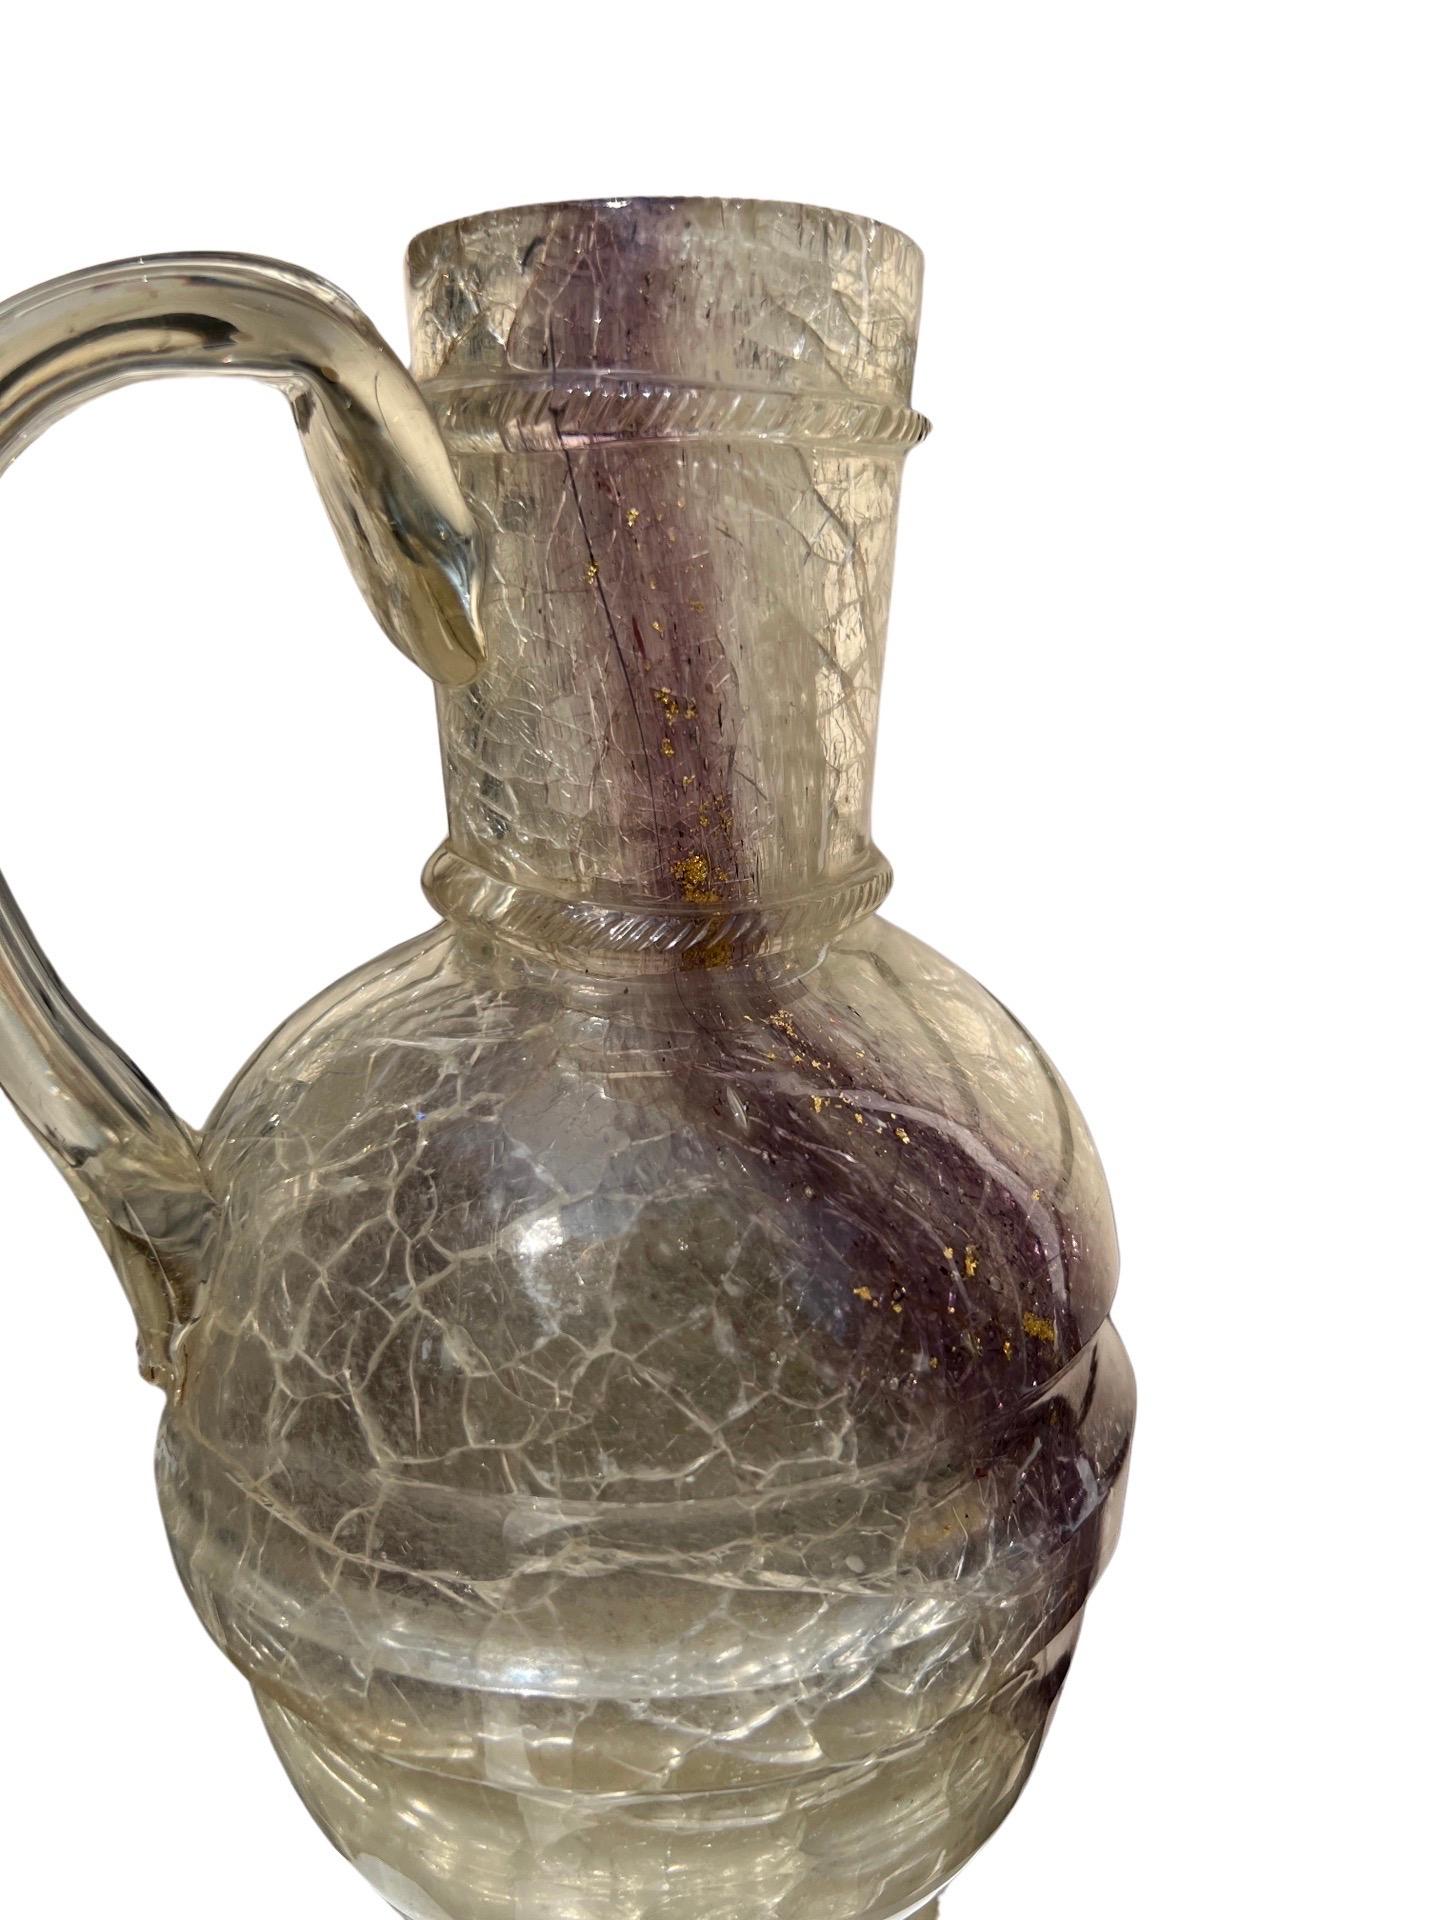 After The Roman Antique - Rock Crystal, Glass & Gold Flecking Grand Tour Pitcher For Sale 10